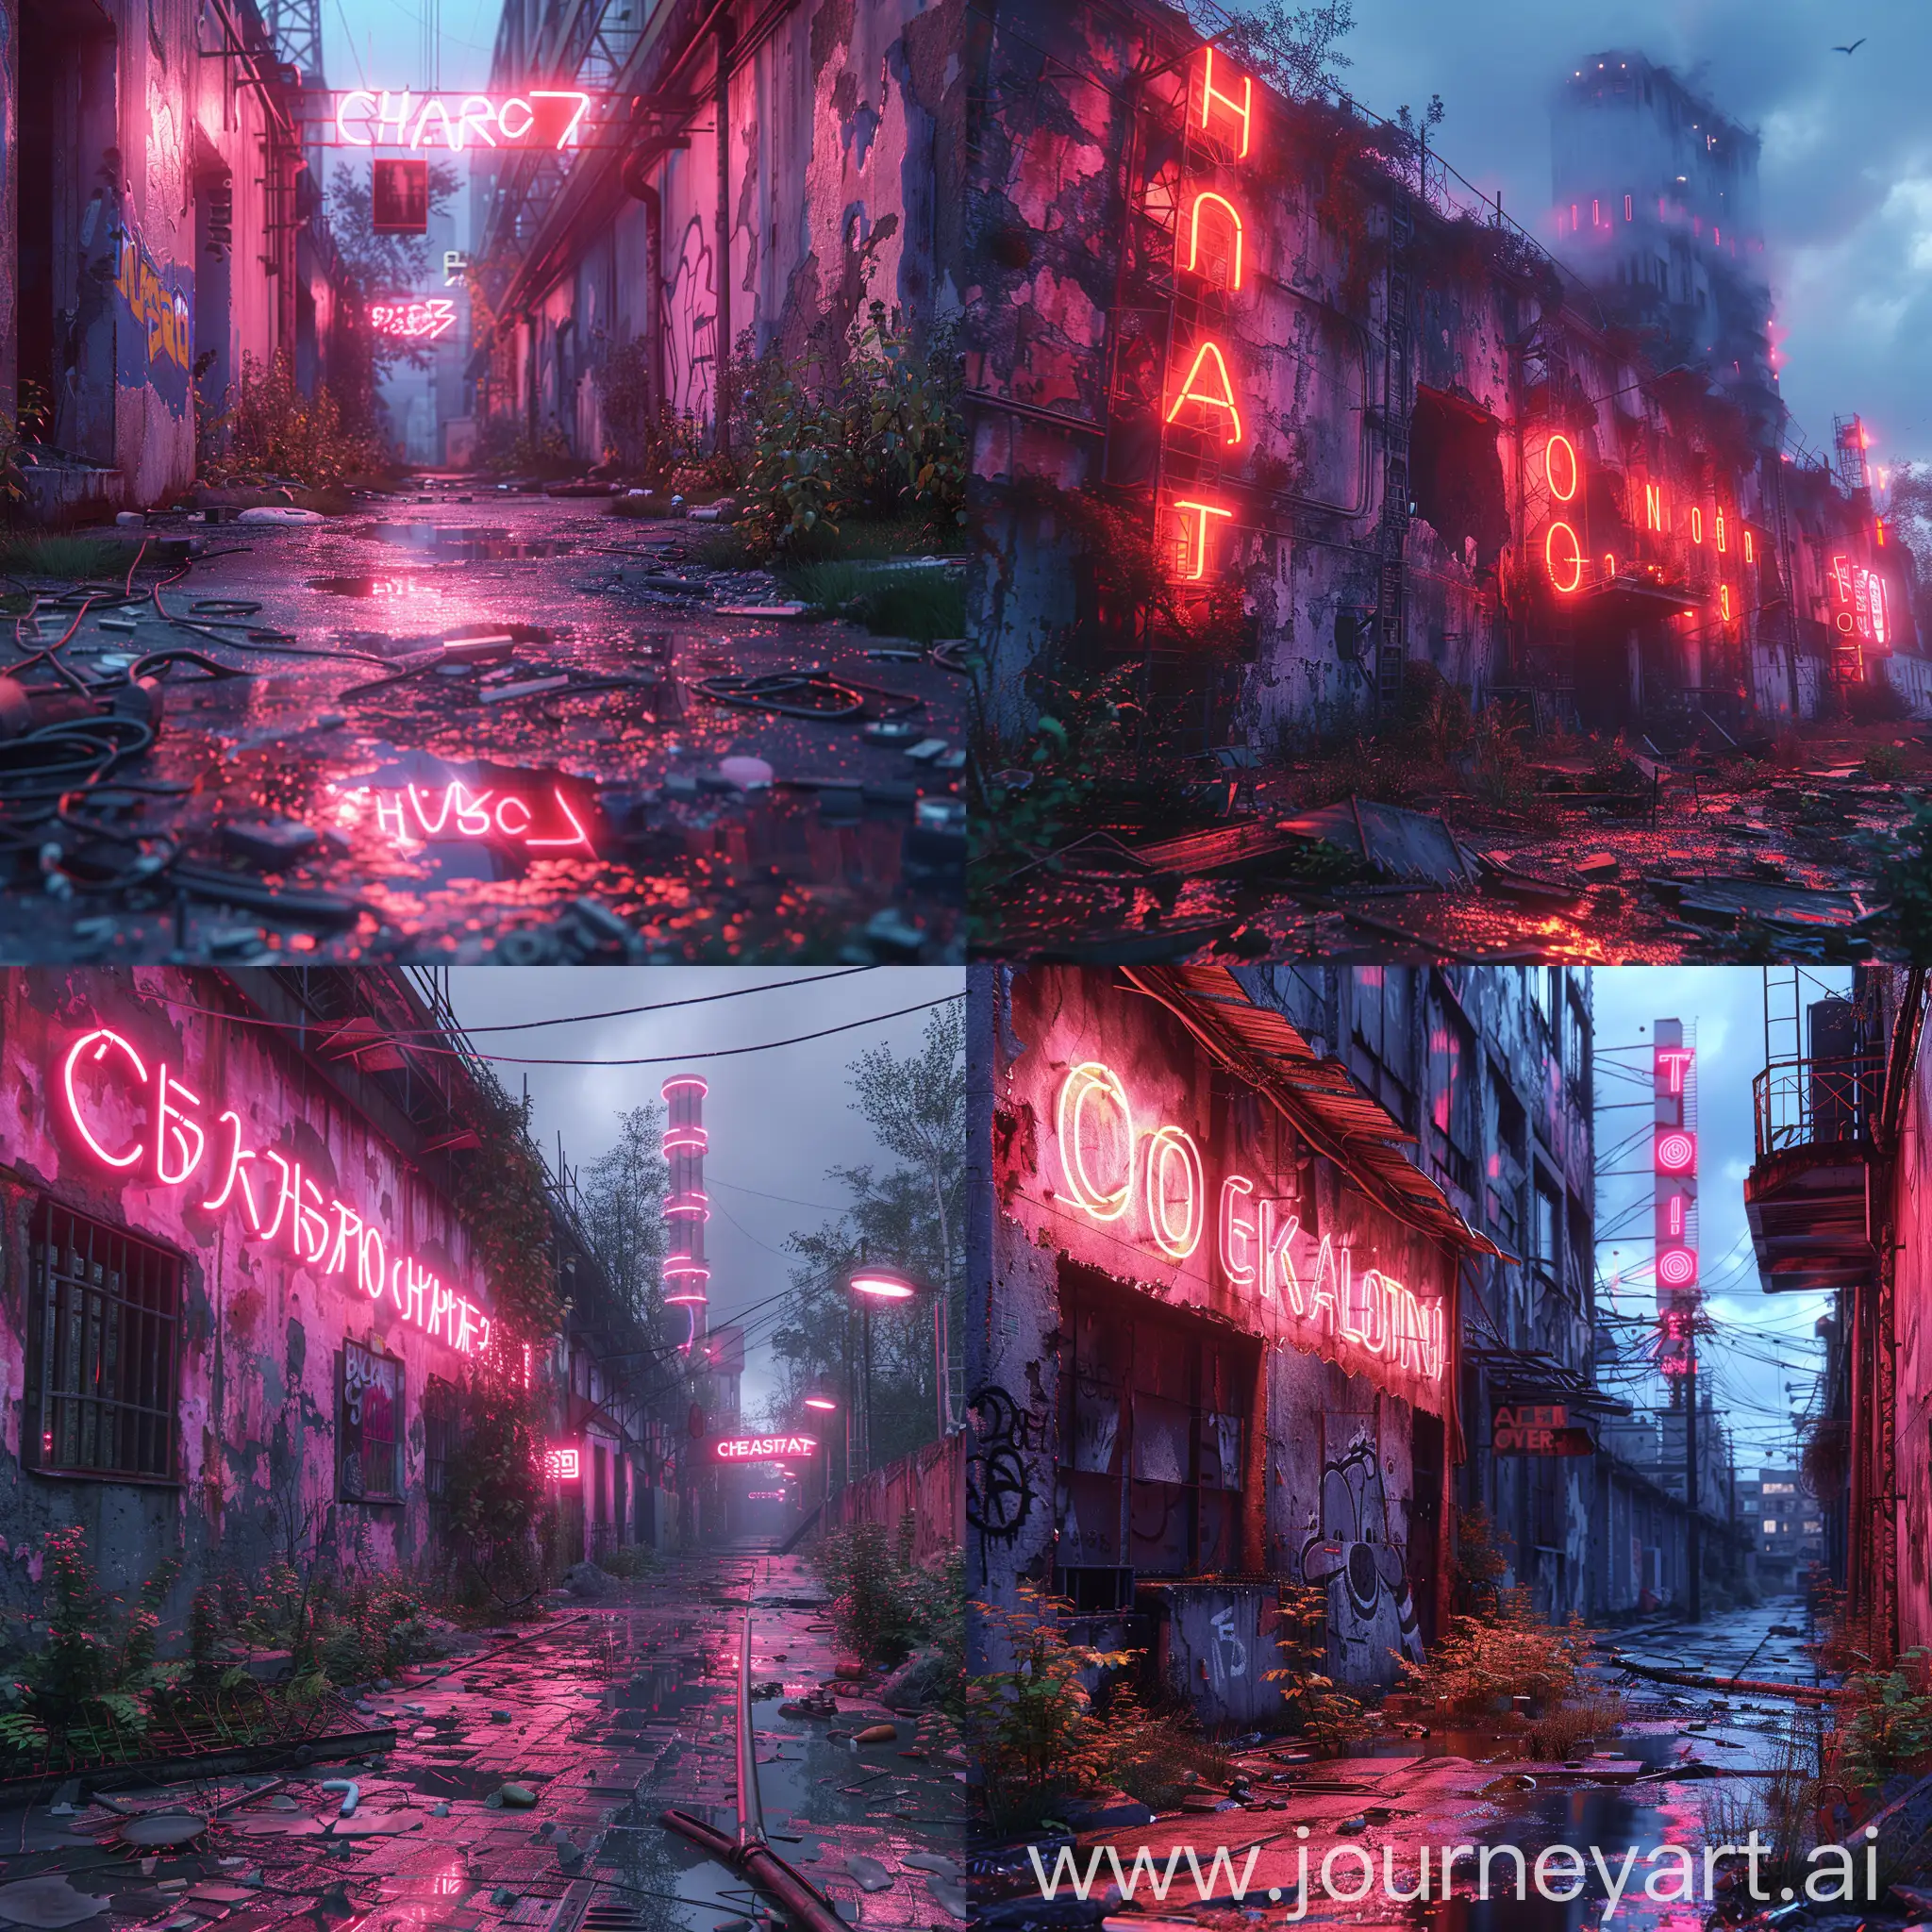 Futuristic-Chernobyl-Neon-Cityscape-with-HighTech-LED-Lights